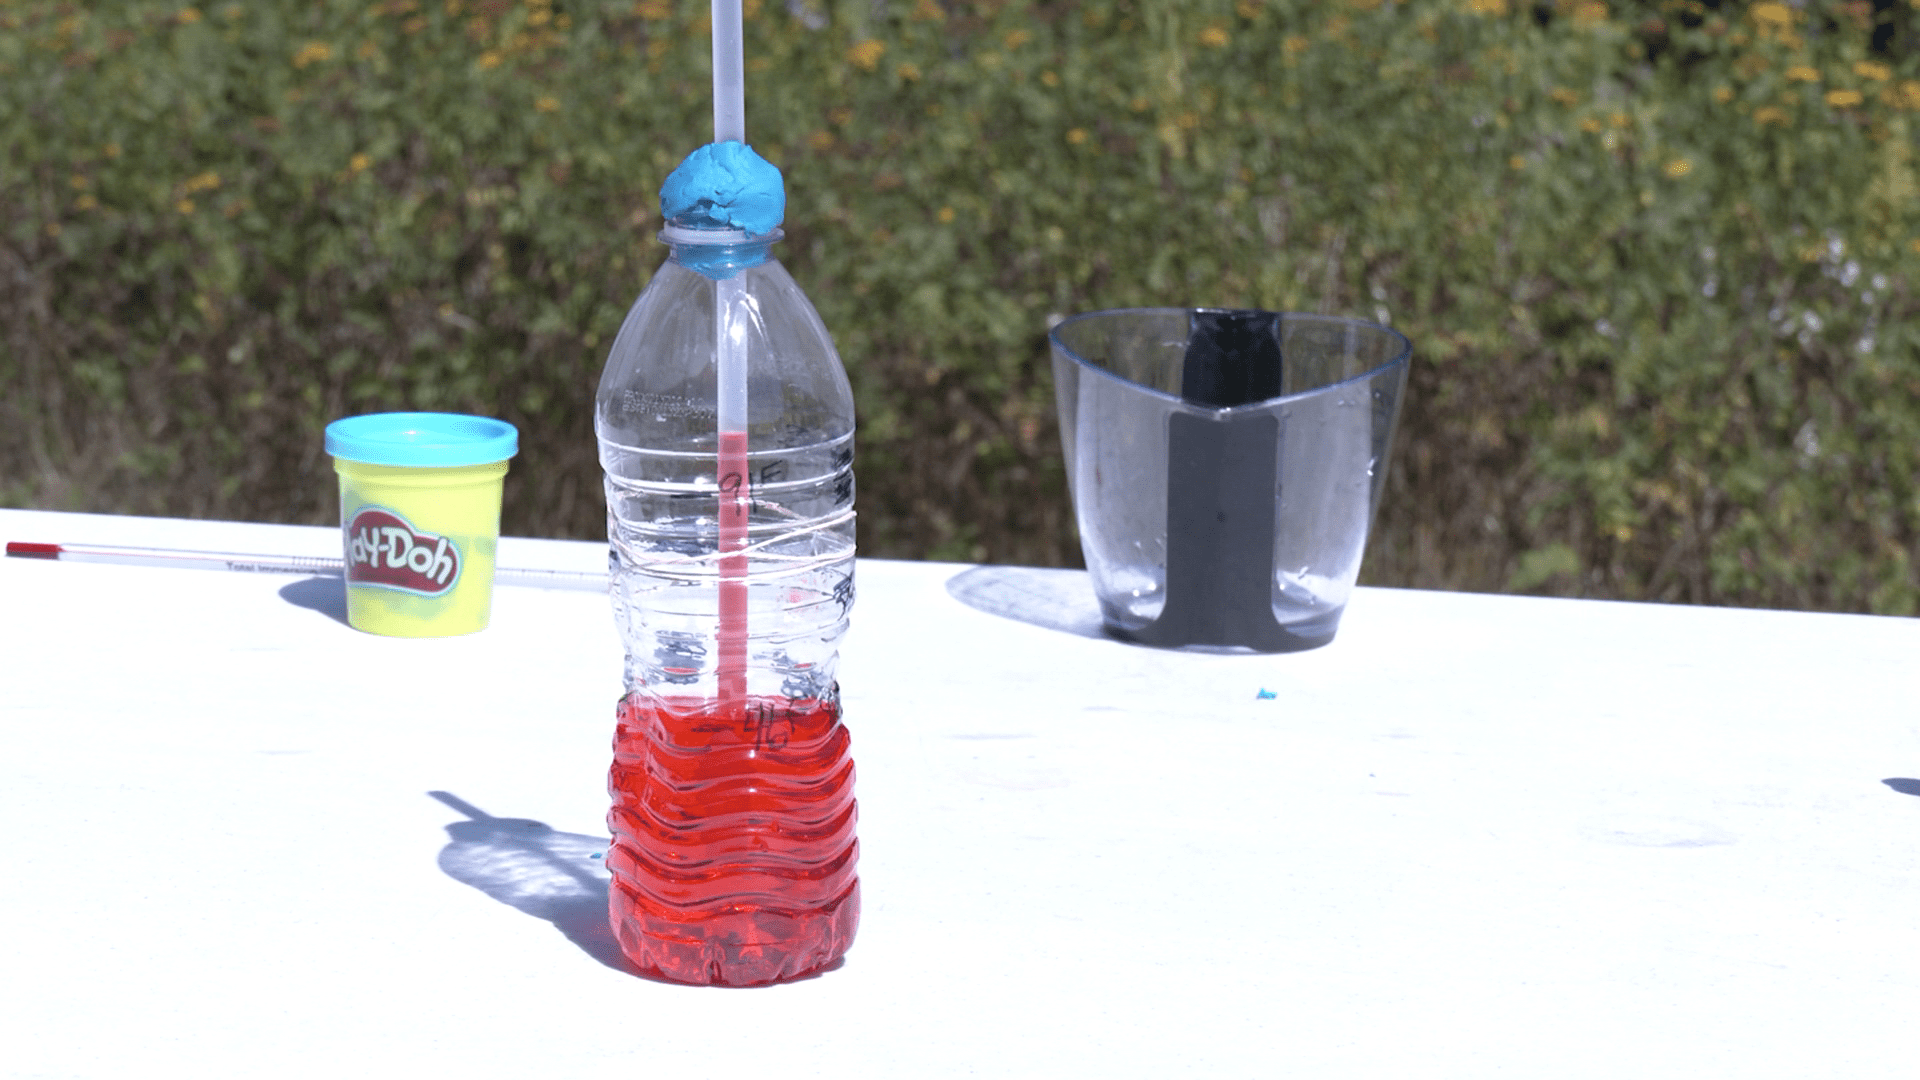 Homemade thermometer